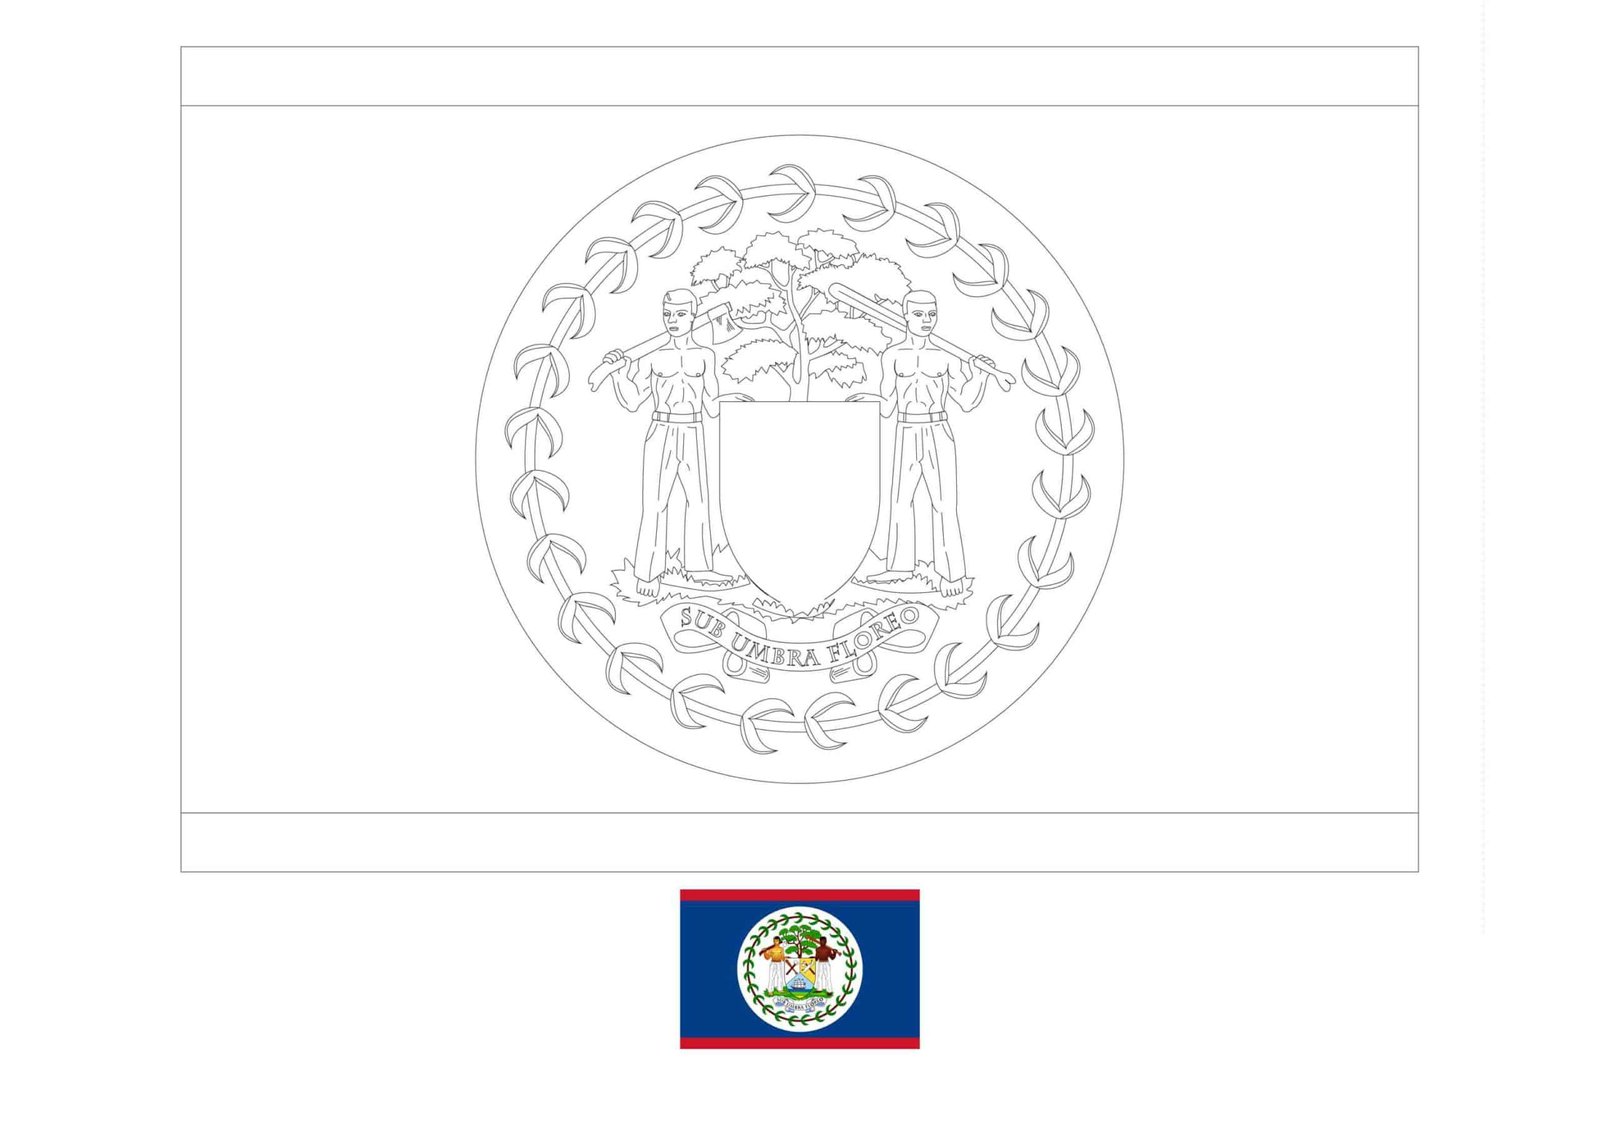 Belize flag coloring page with a sample